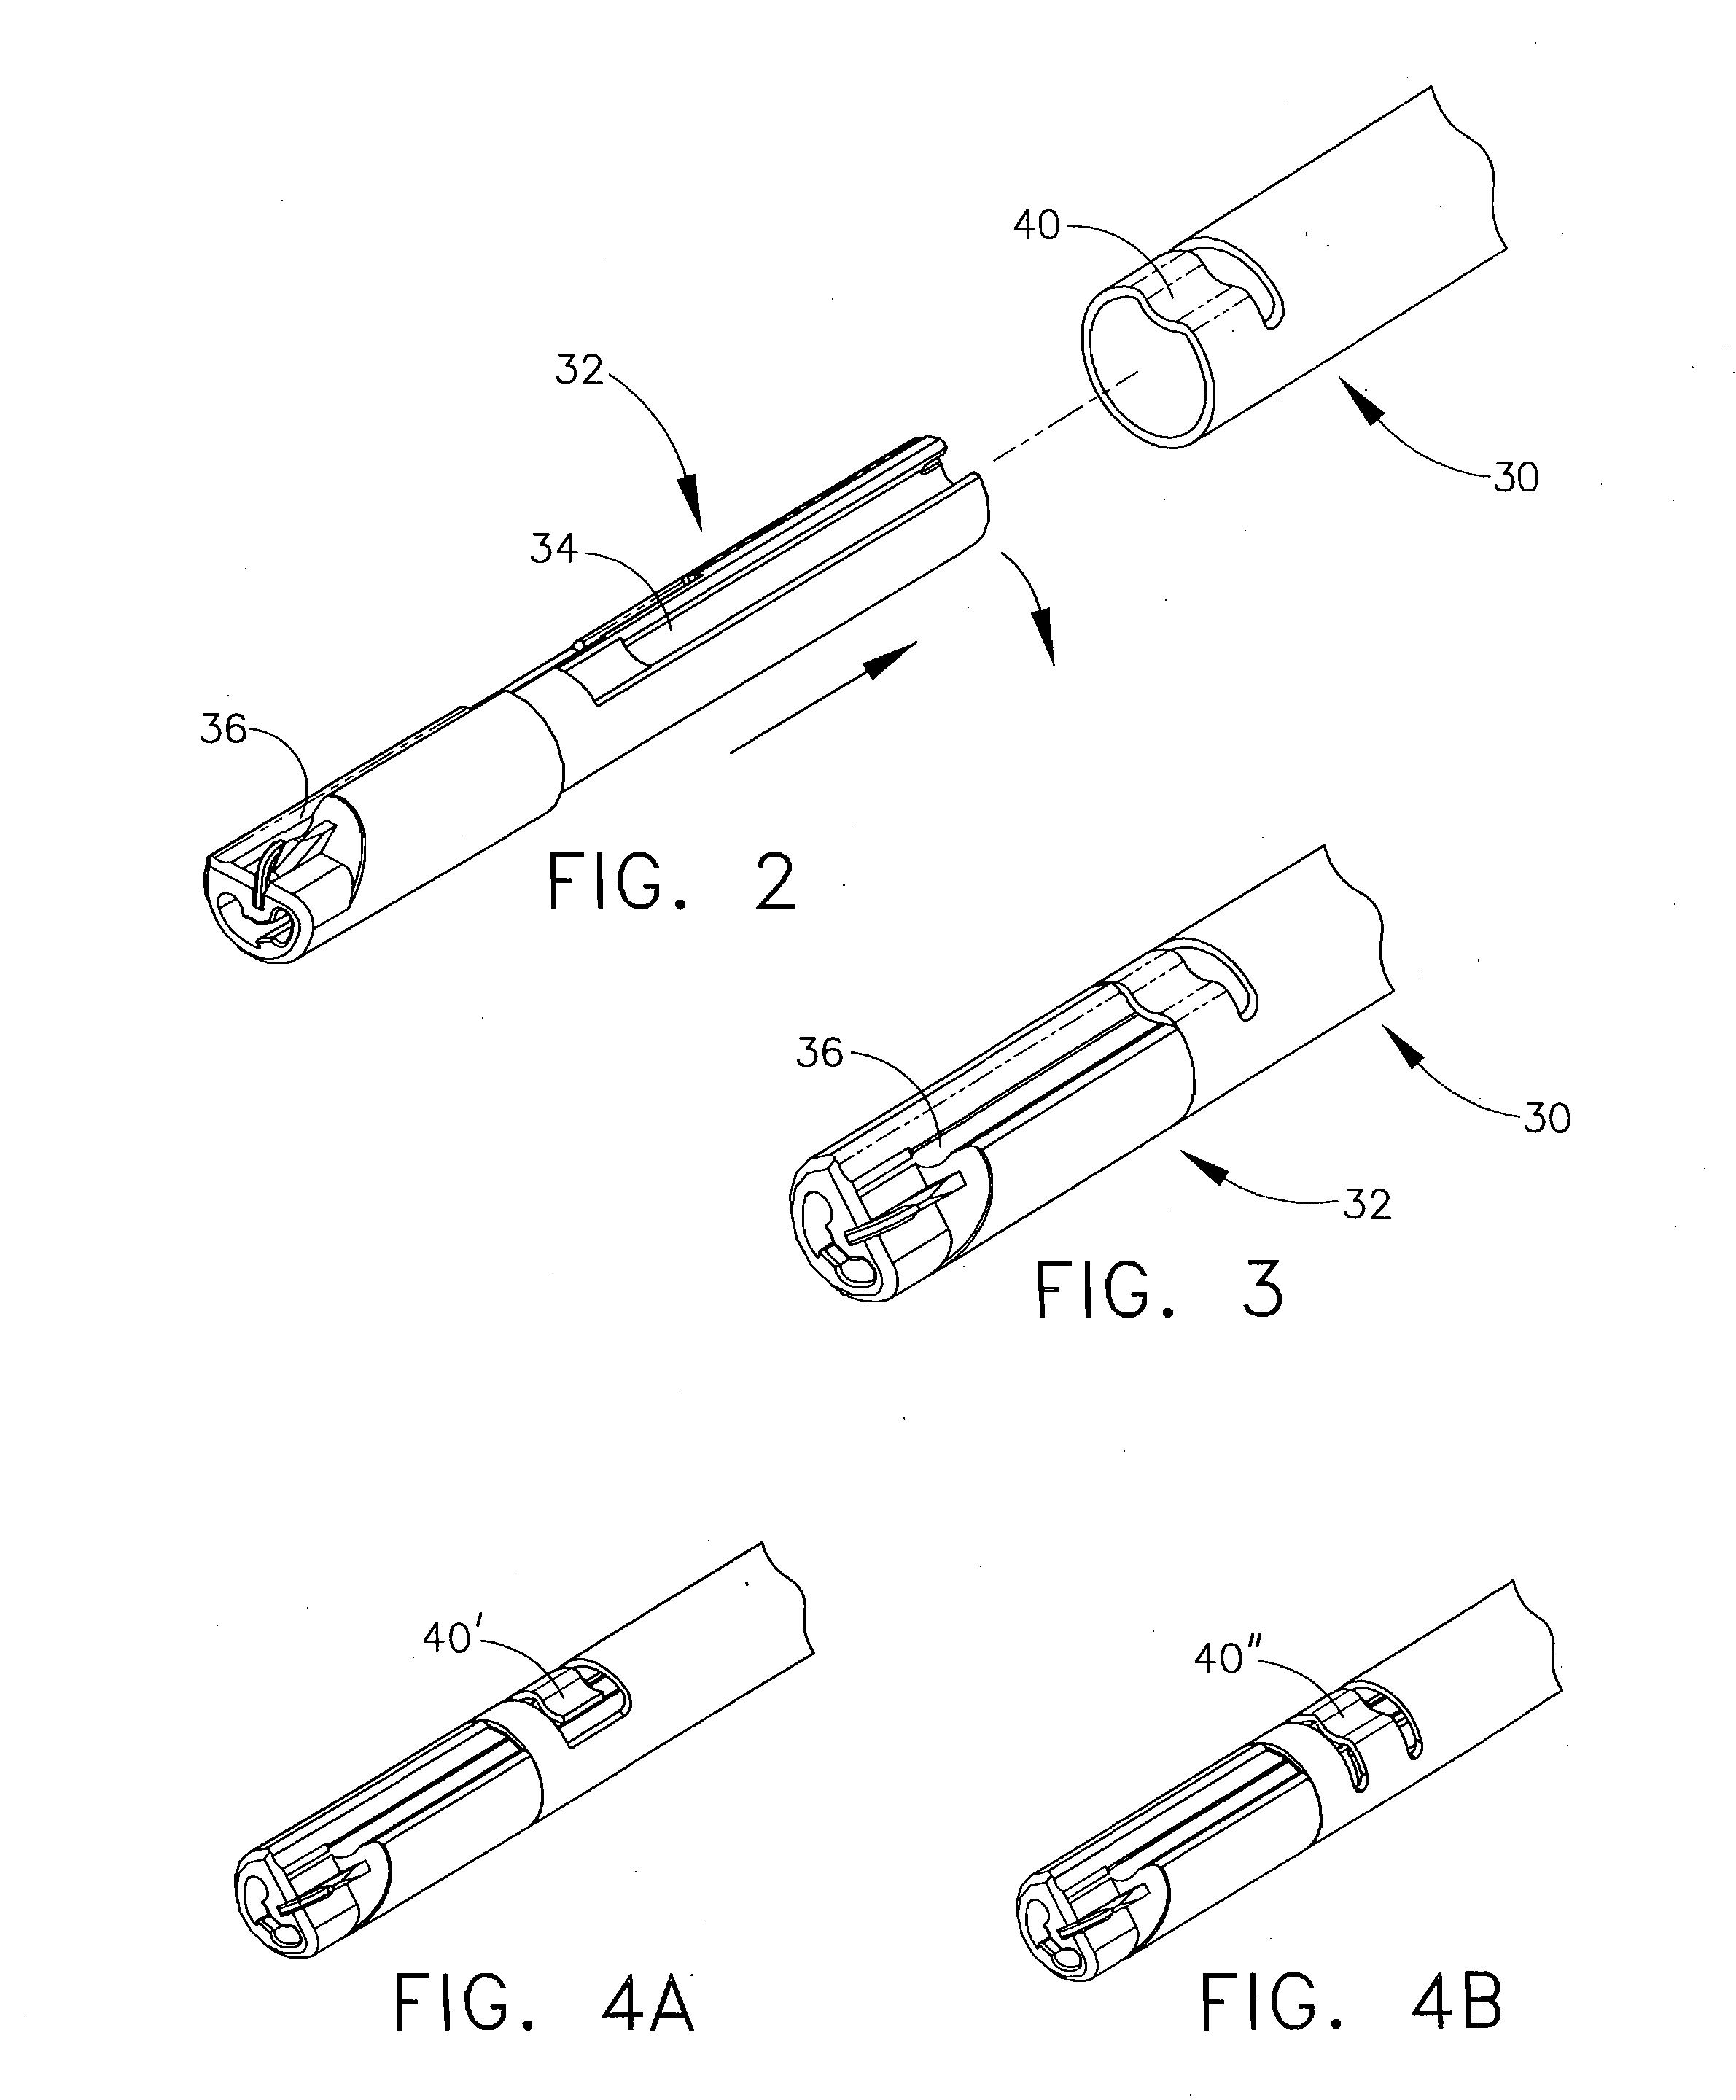 Reloadable laparoscopic fastener deploying device for use in a gastric volume reduction procedure